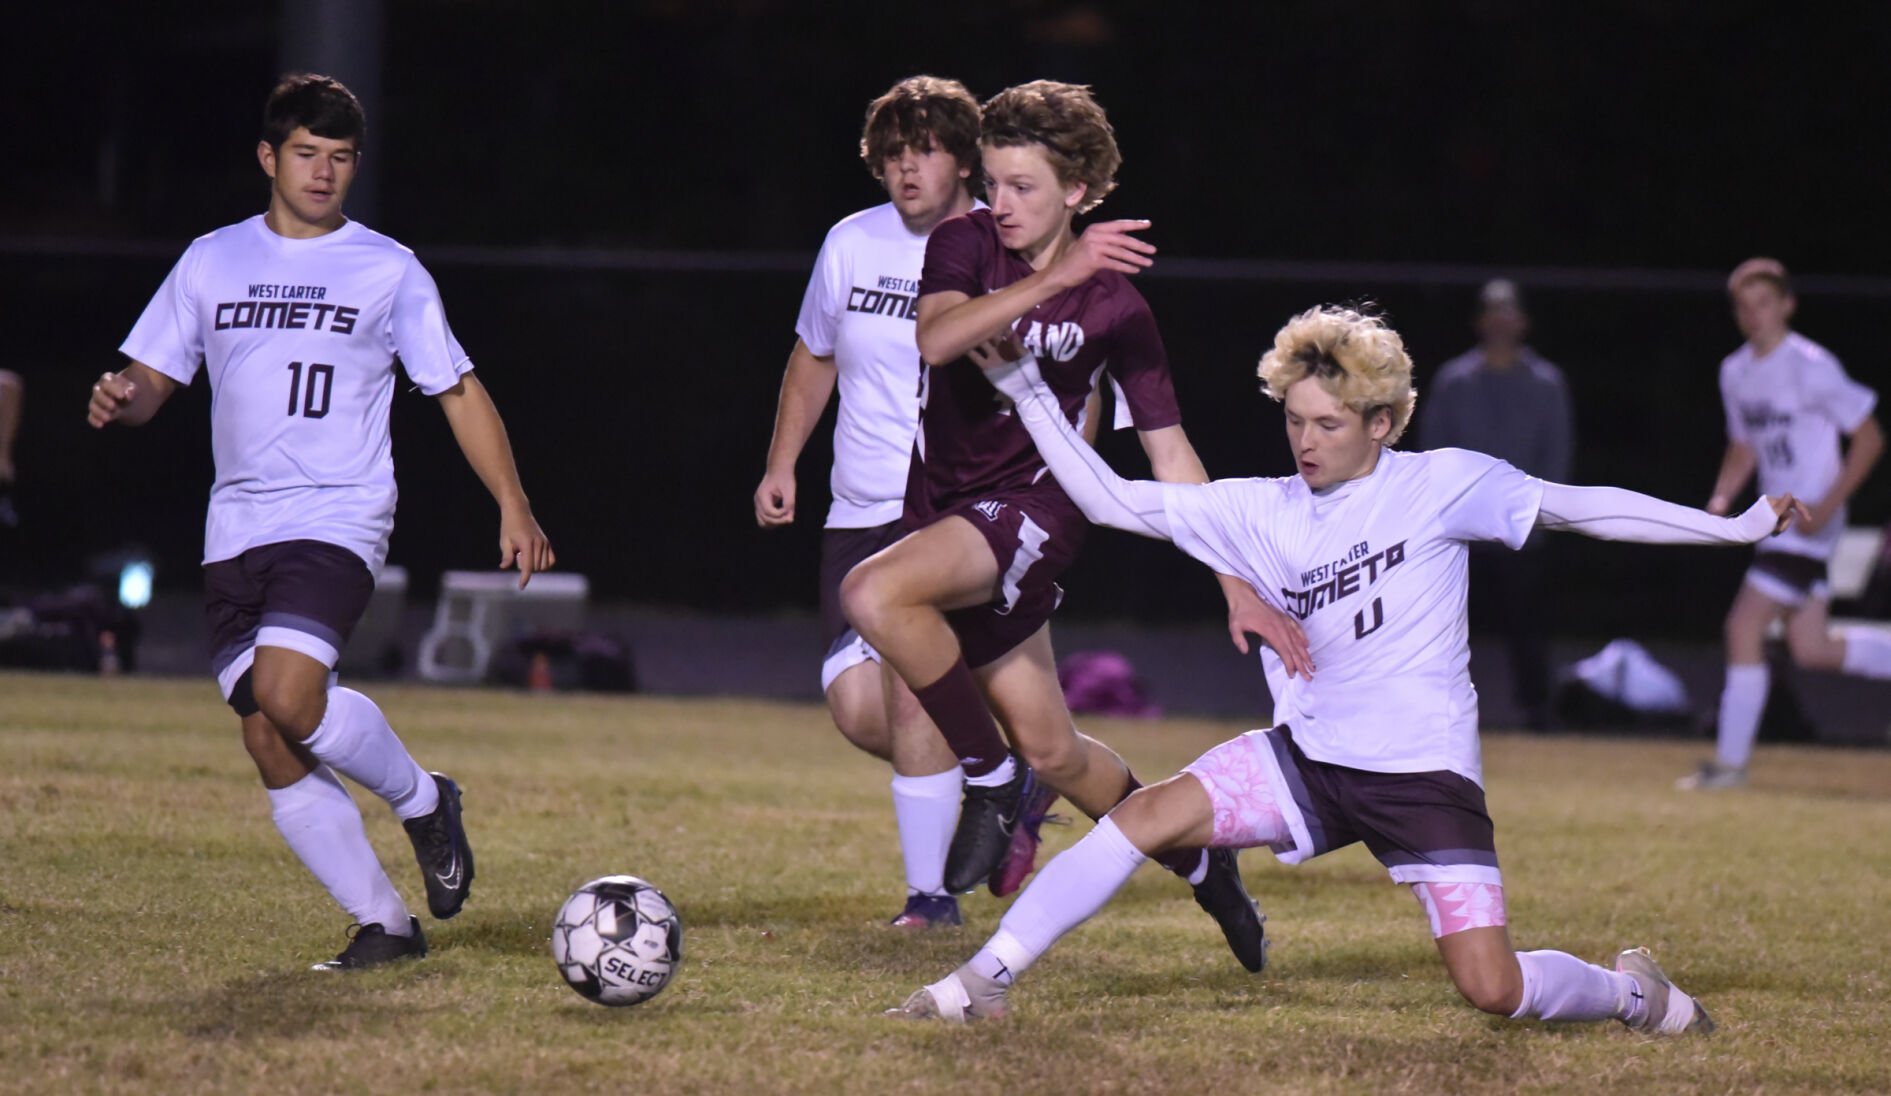 Ashland Tomcats rally in second half to secure 4-0 victory and advance to semifinals